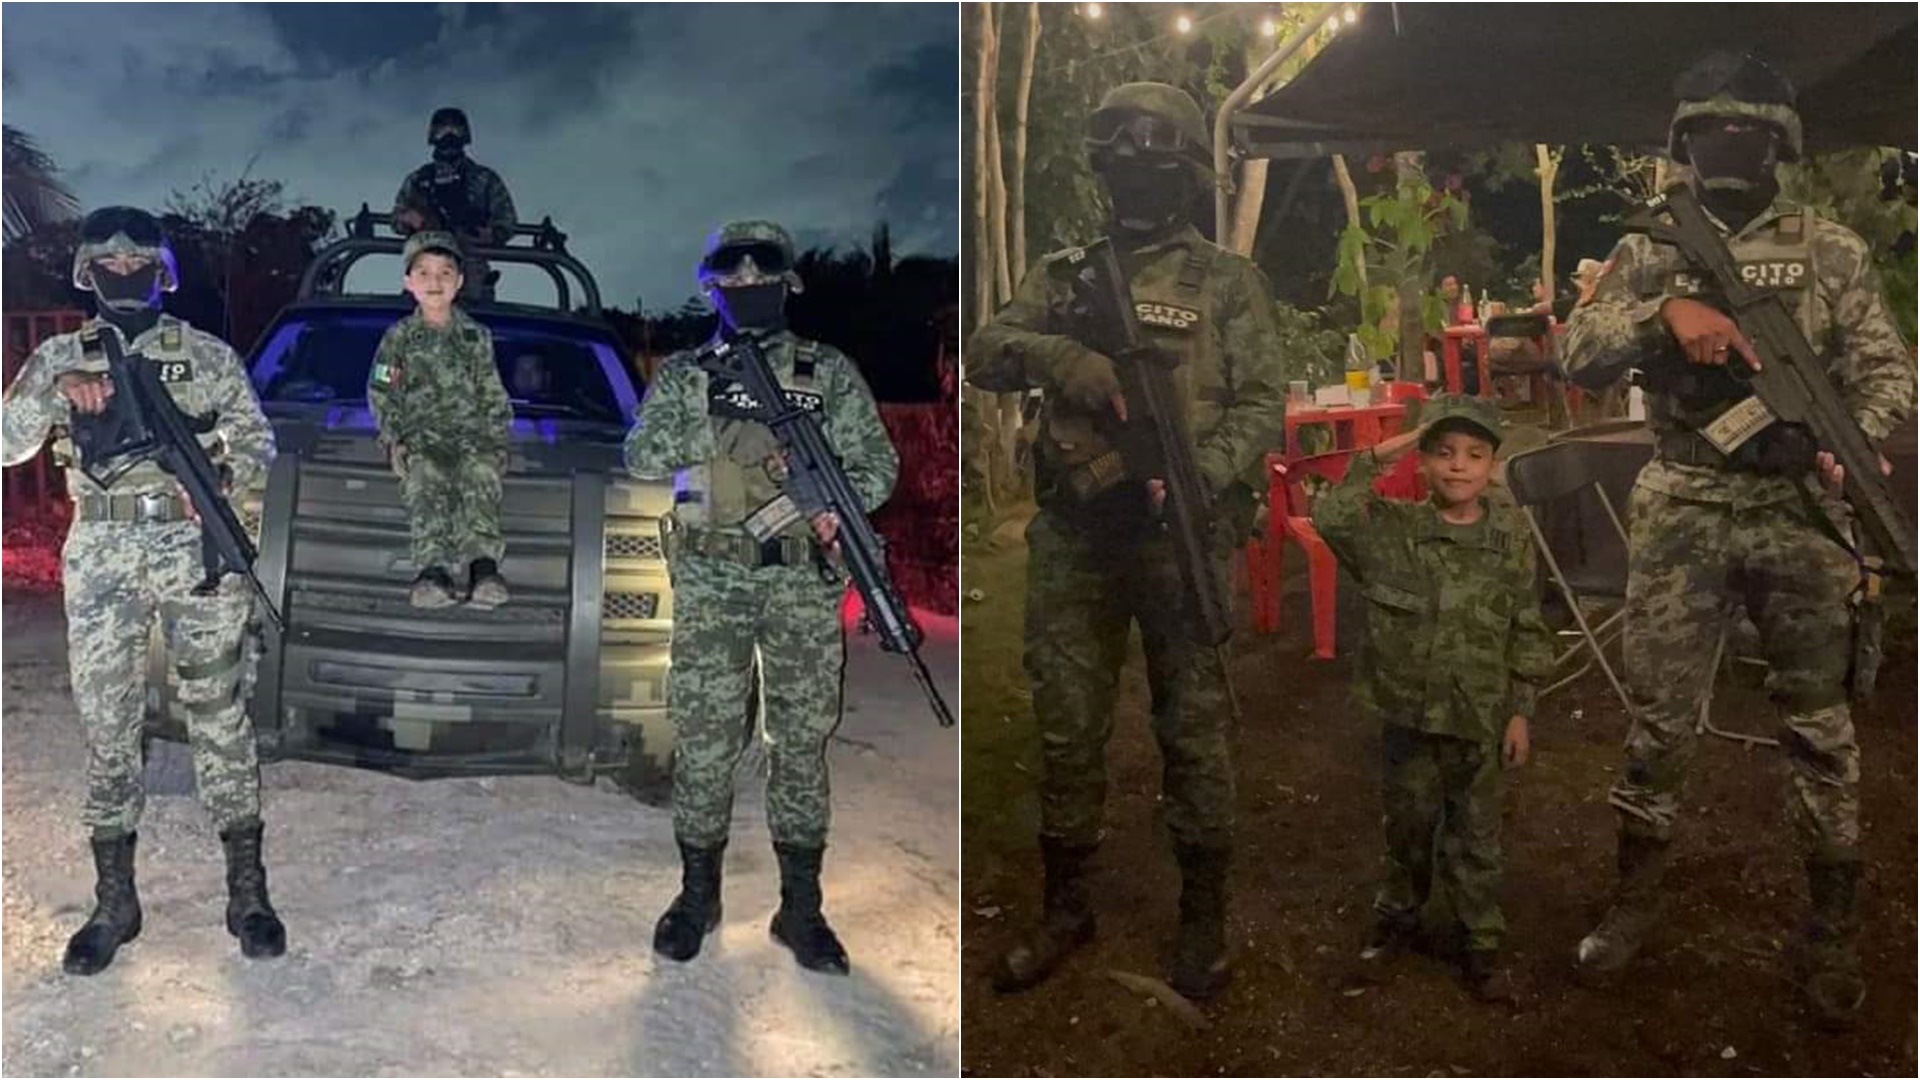 The minor took photos with the military.  Photo: Twitter/FronteraRV